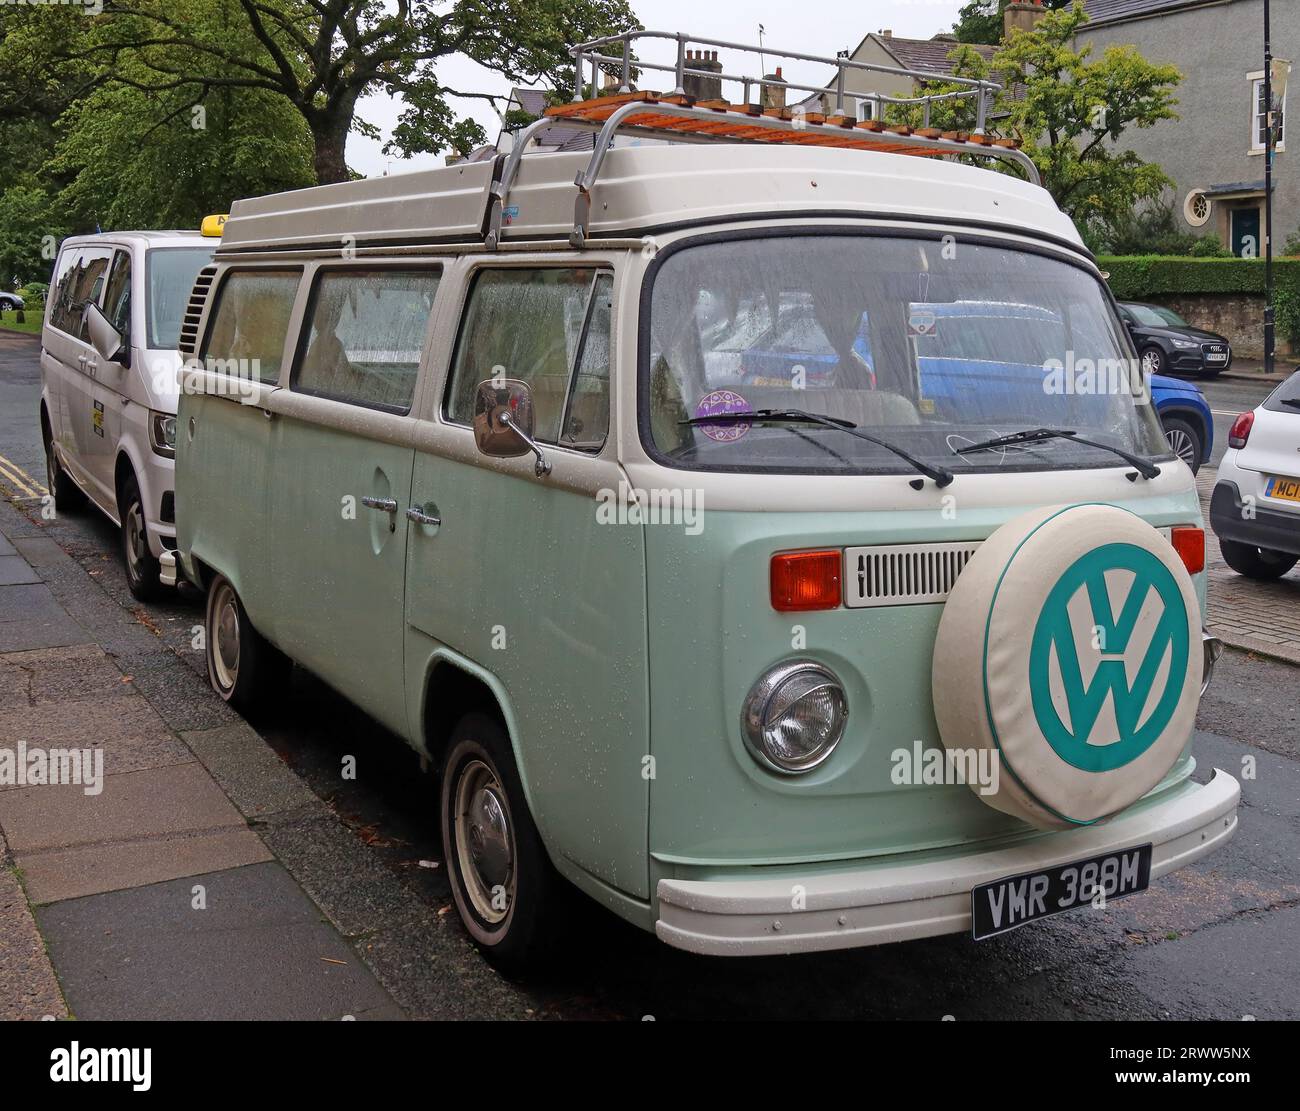 Excellent example of a 1973 vintage VW Camper Van - VMR 388M from the 1970s, parked in Barnard Castle, County Durham, England, UK Stock Photo